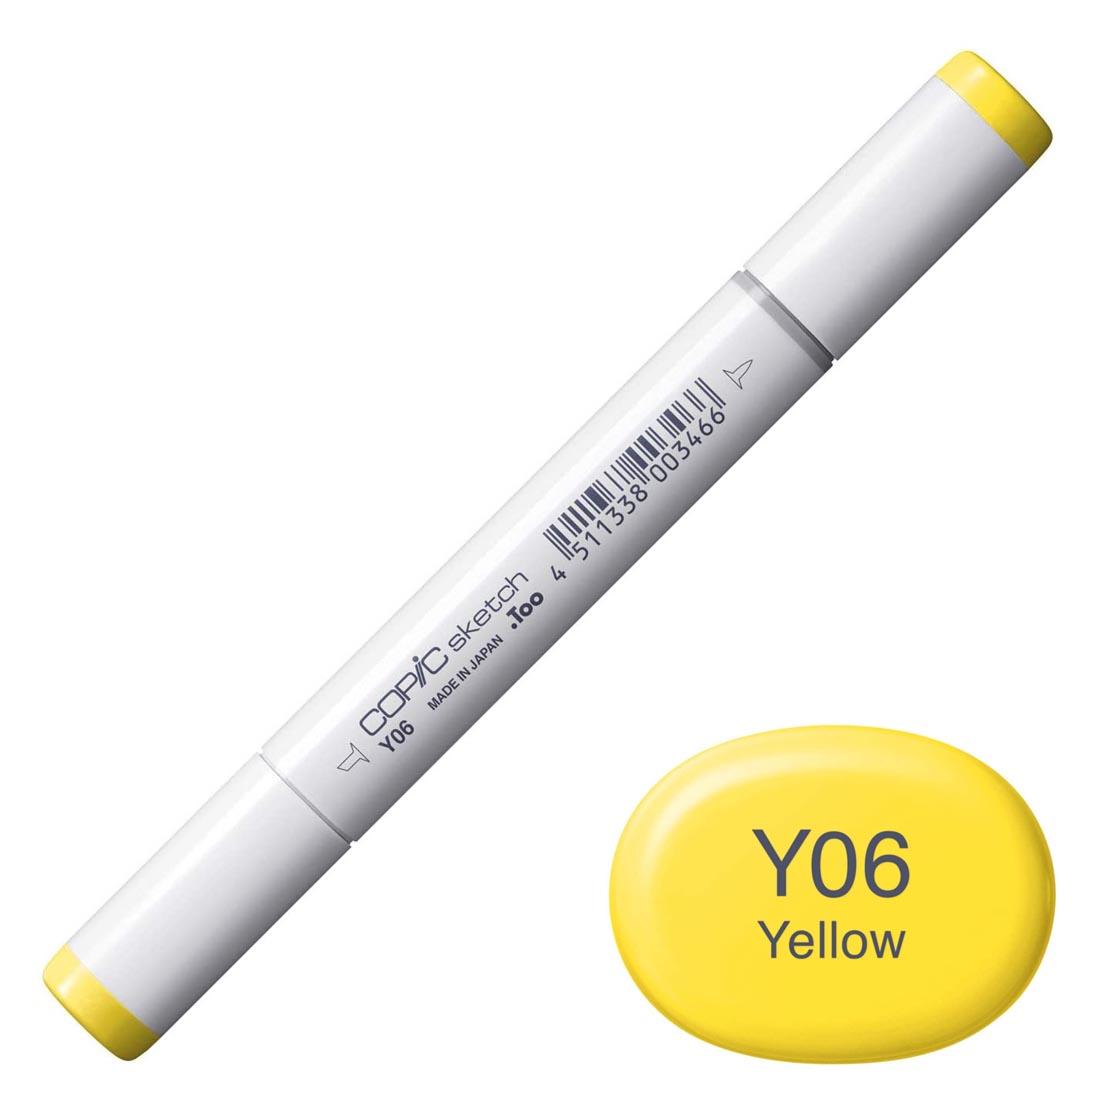 COPIC Sketch Marker with a color swatch and text of Y06 Yellow